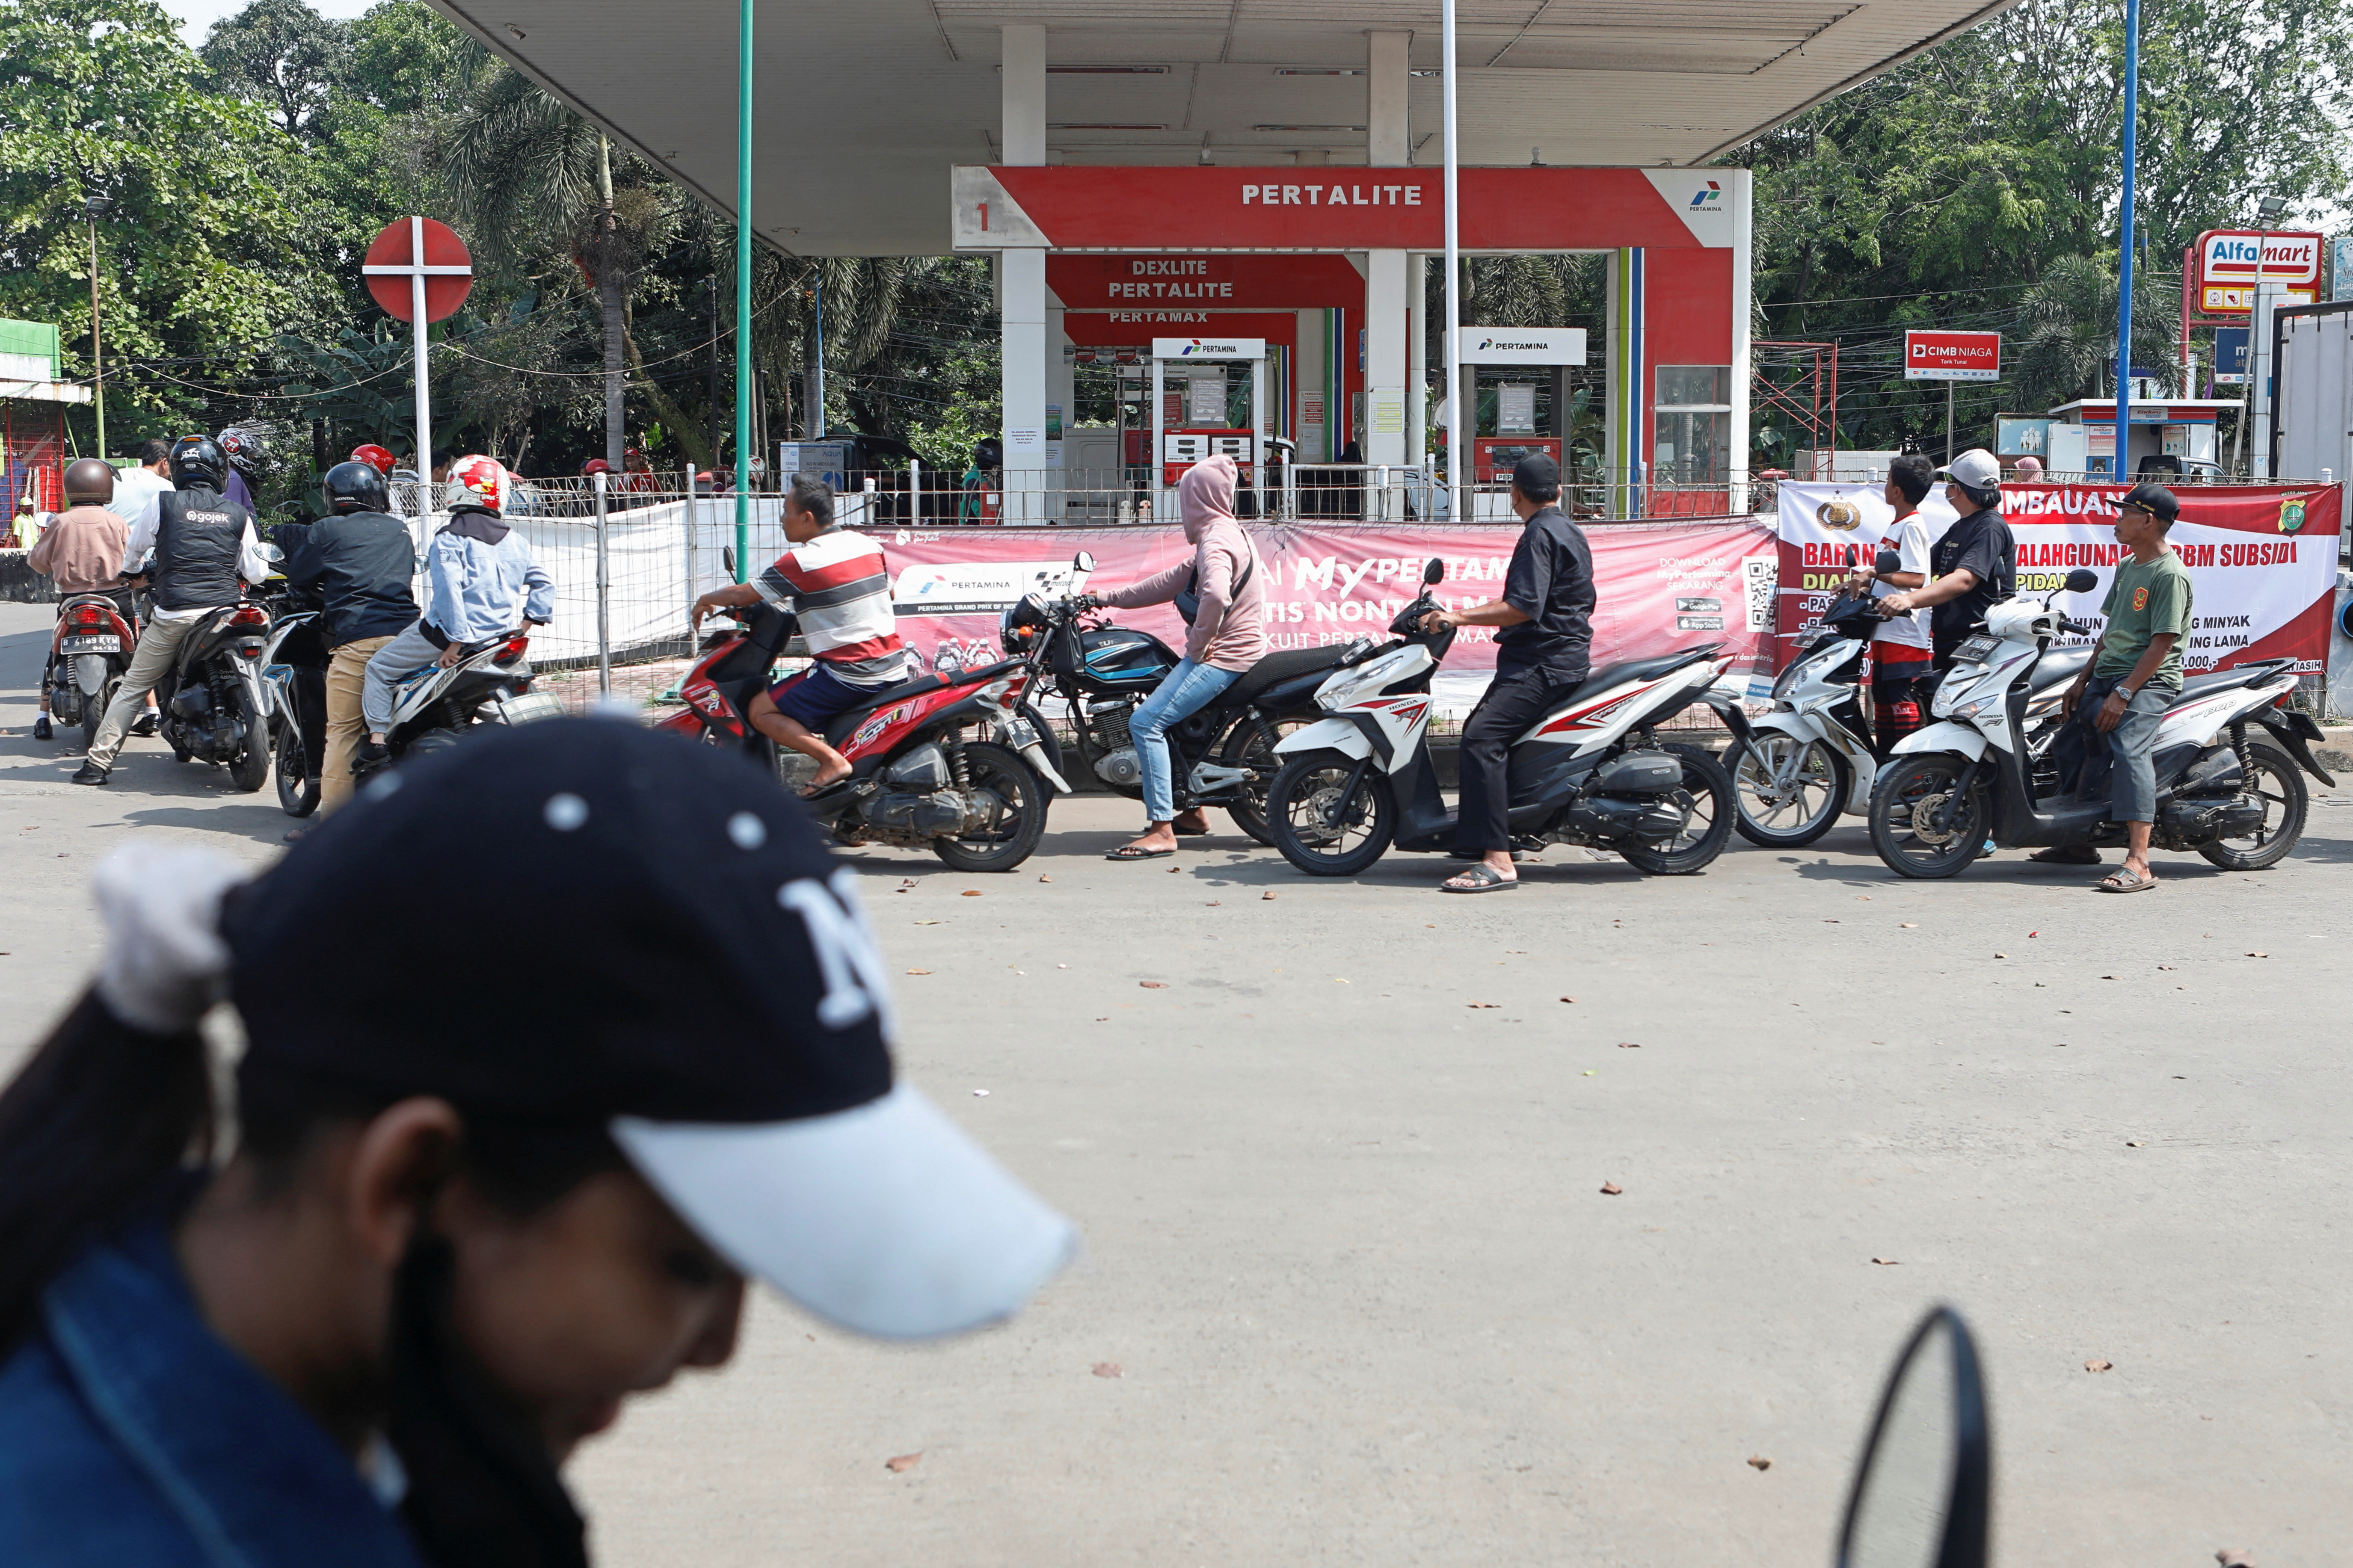 Motorcycle drivers wait in line to buy subsidised fuel at a petrol station of the state-owned company Pertamina after the announcement of a fuel price hike, in Bekasi